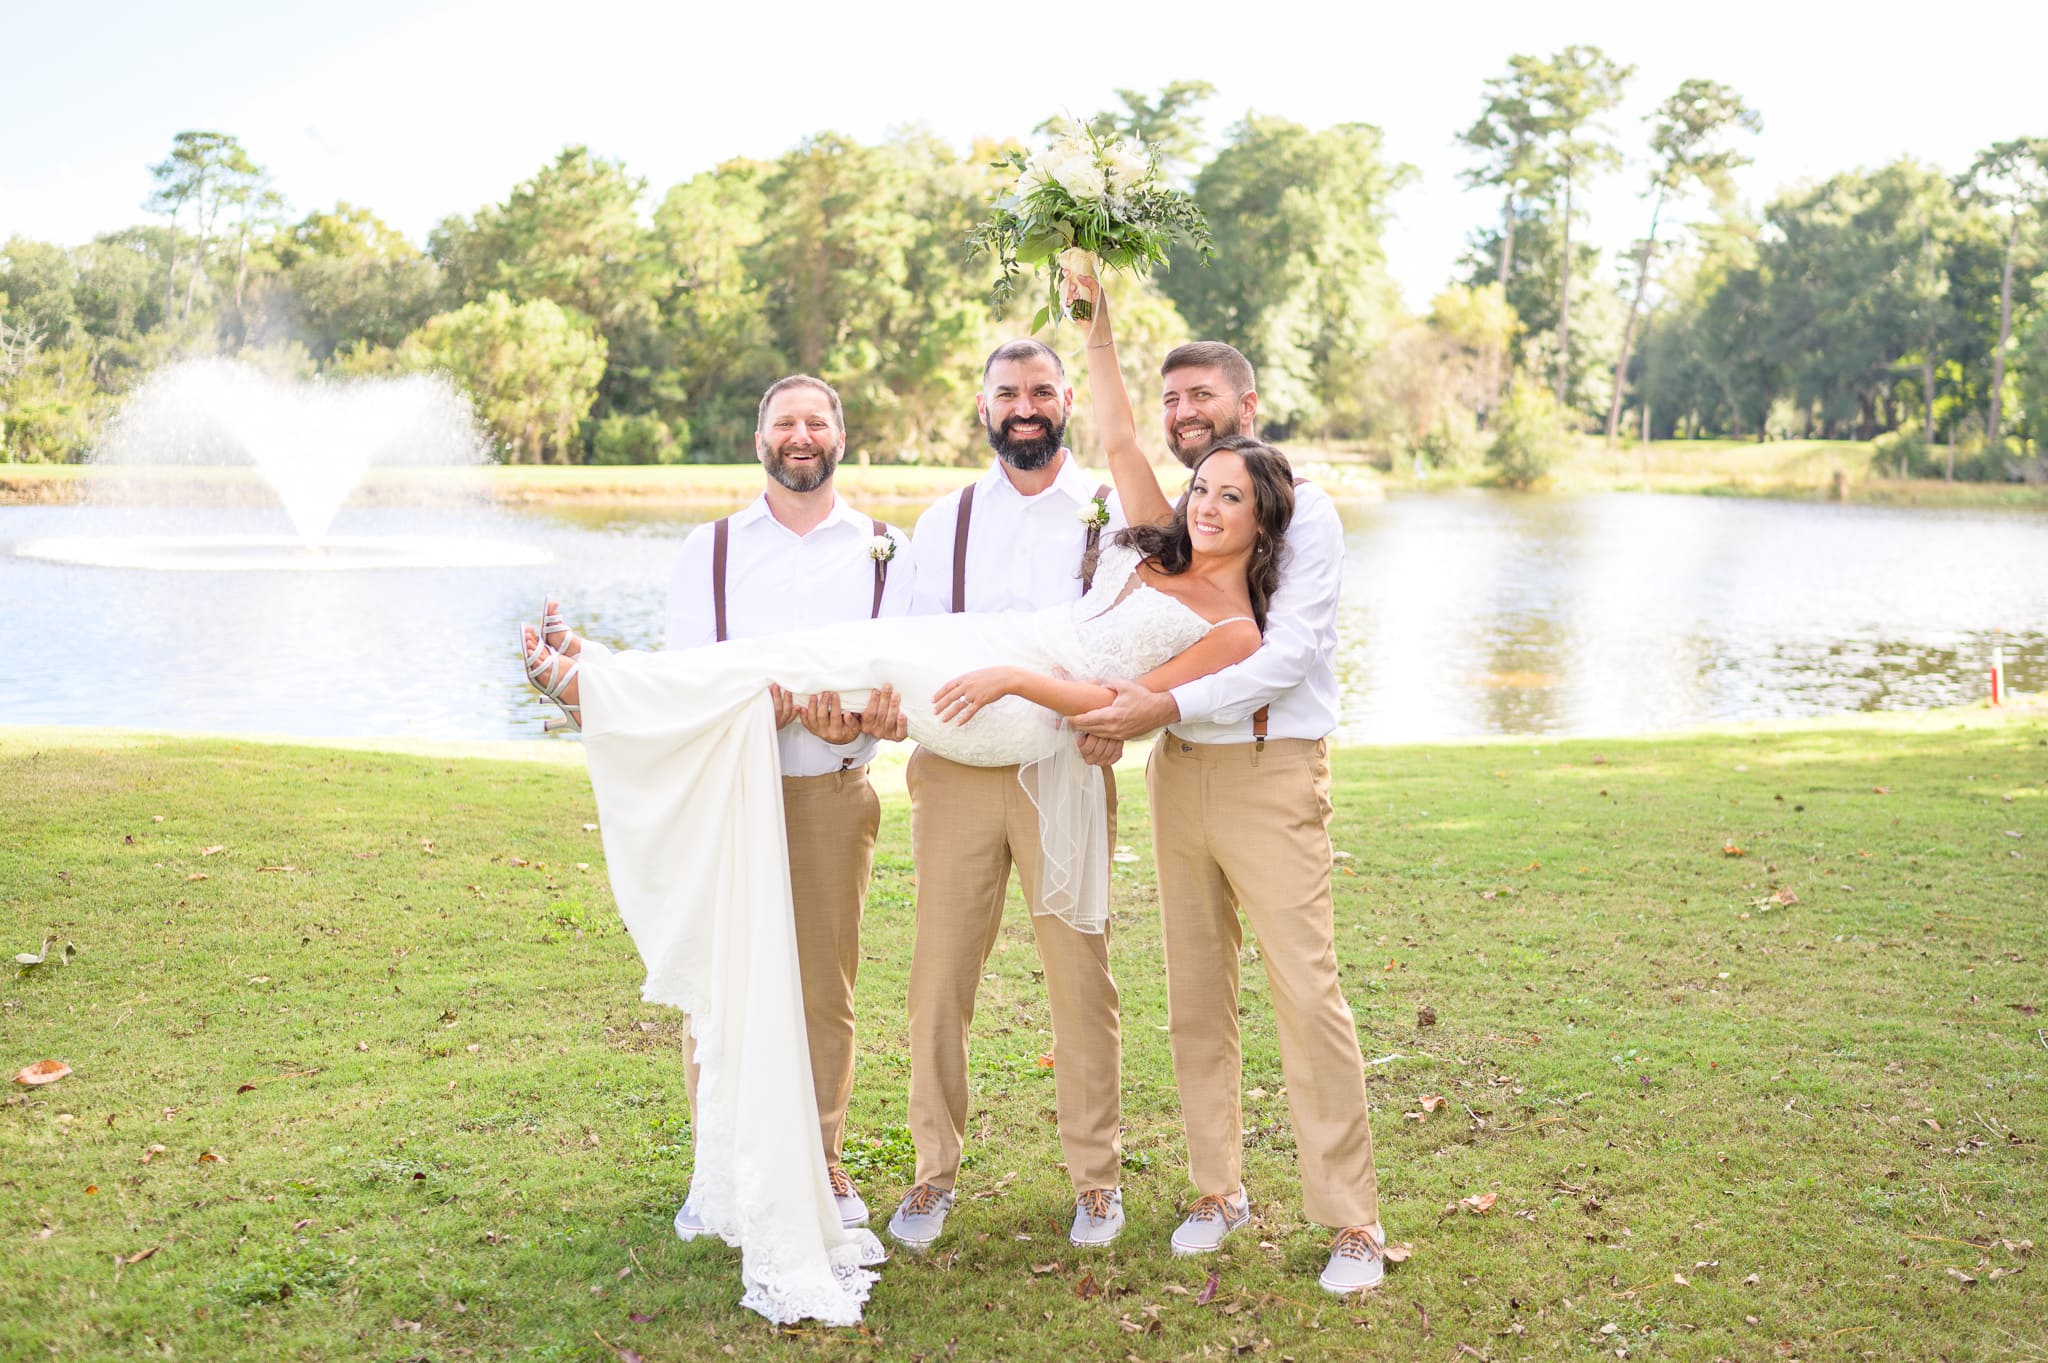 Groom and brothers picking up the bride - Pawleys Plantation